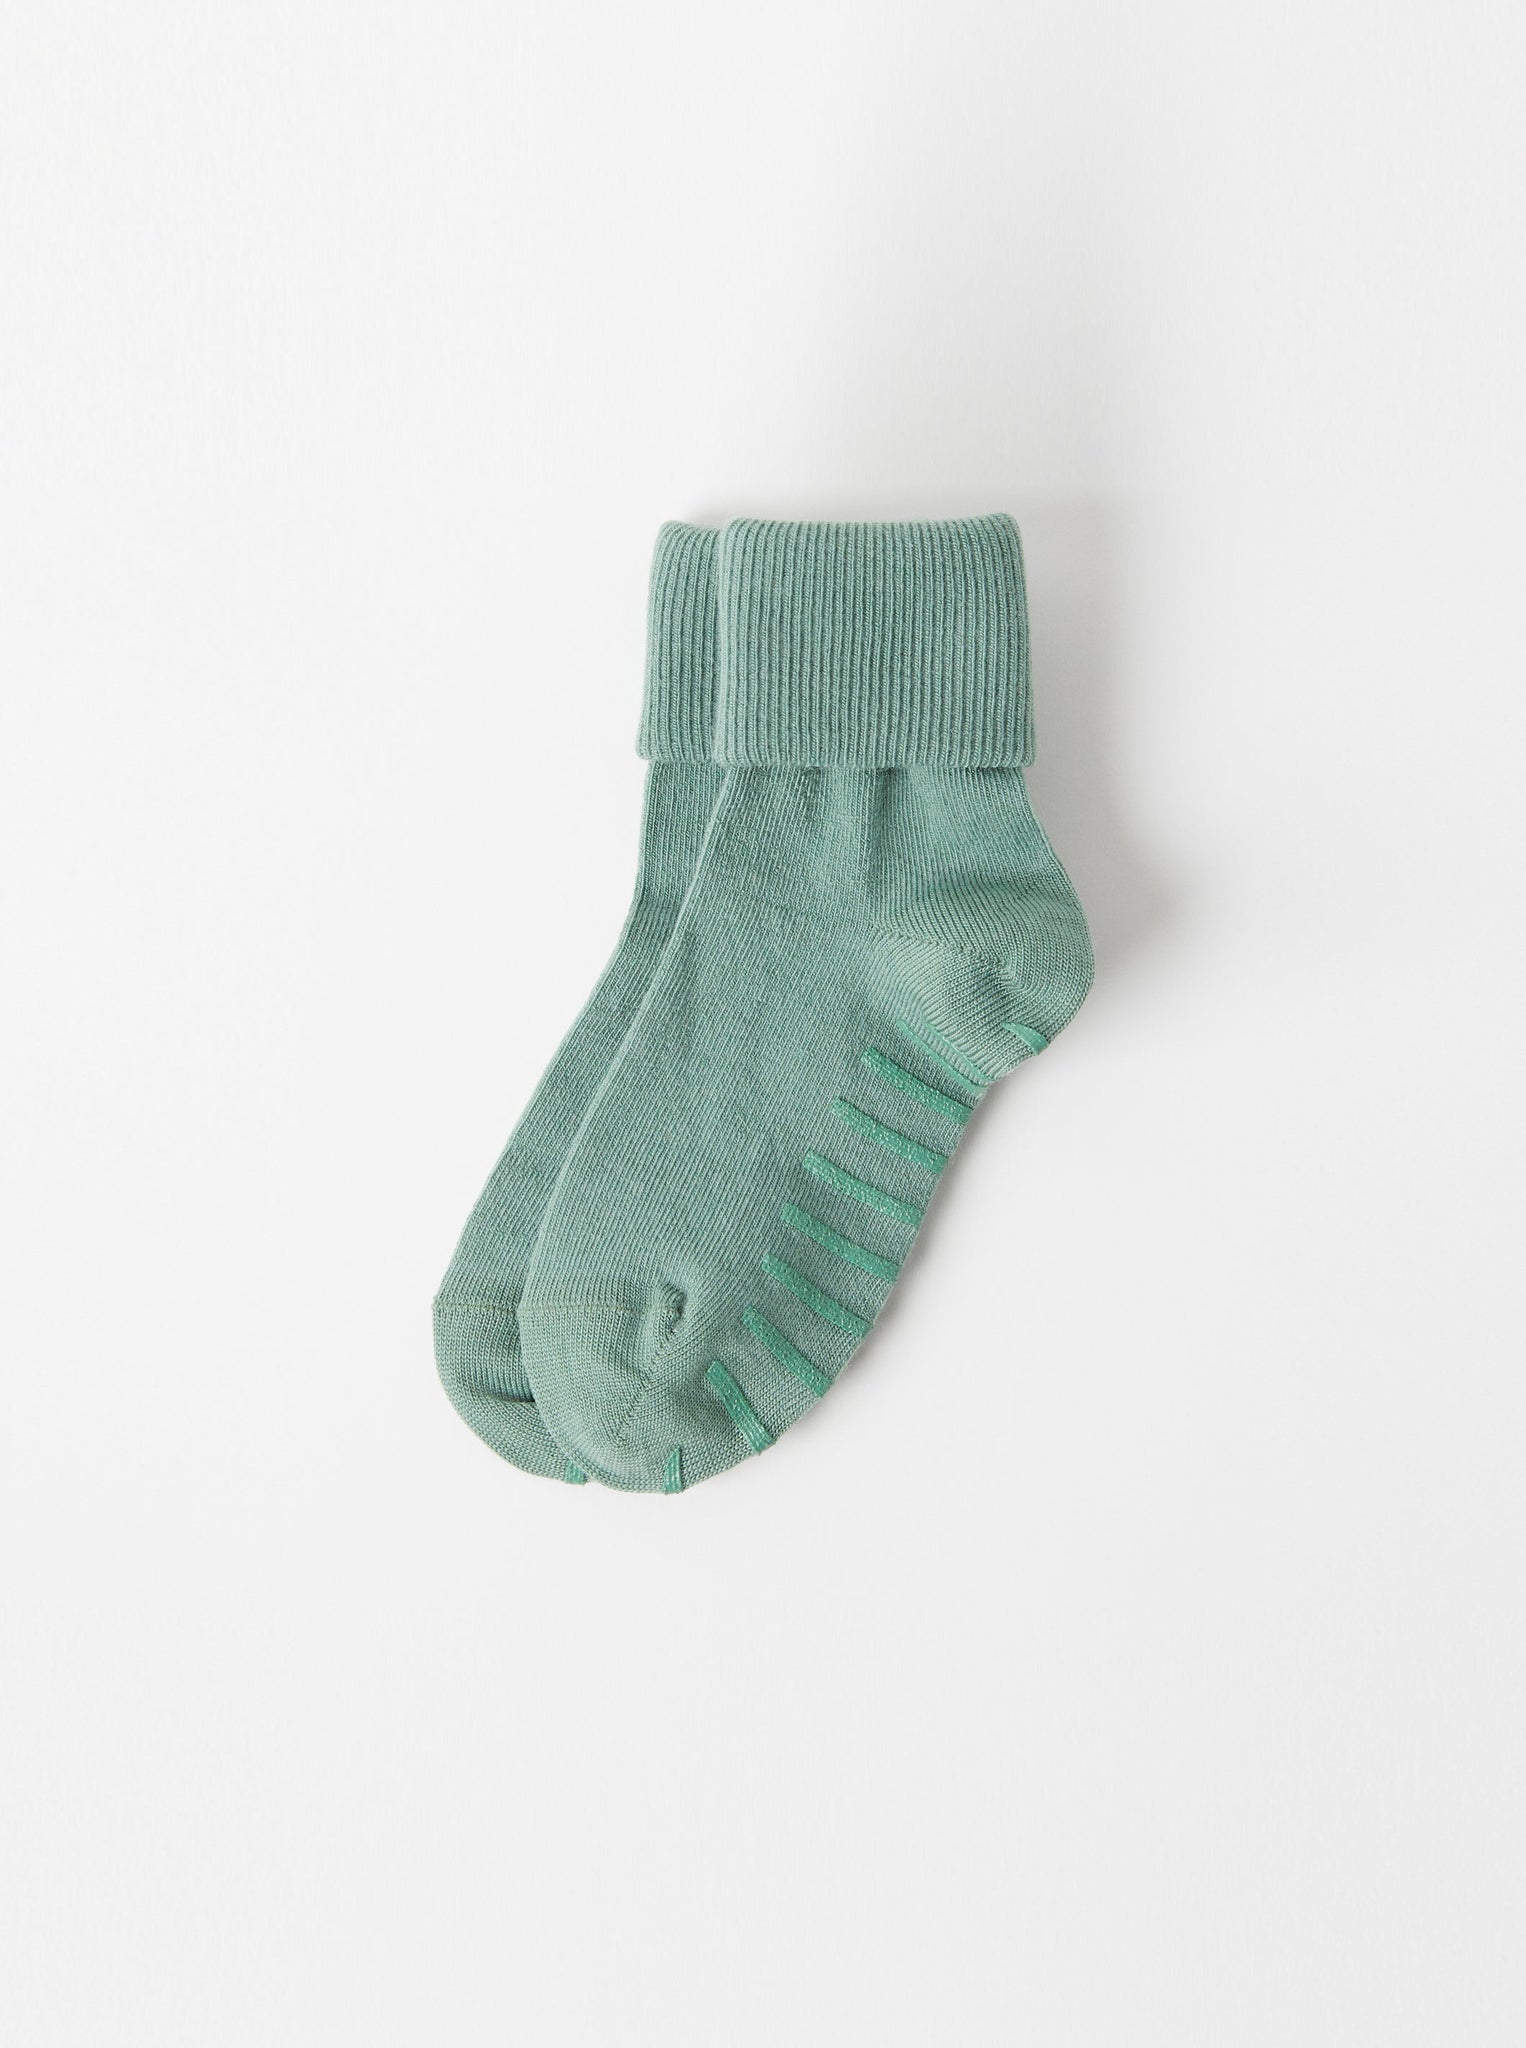 Green Merino Wool Baby Socks from the Polarn O. Pyret kidswear collection. The best ethical kids outerwear.